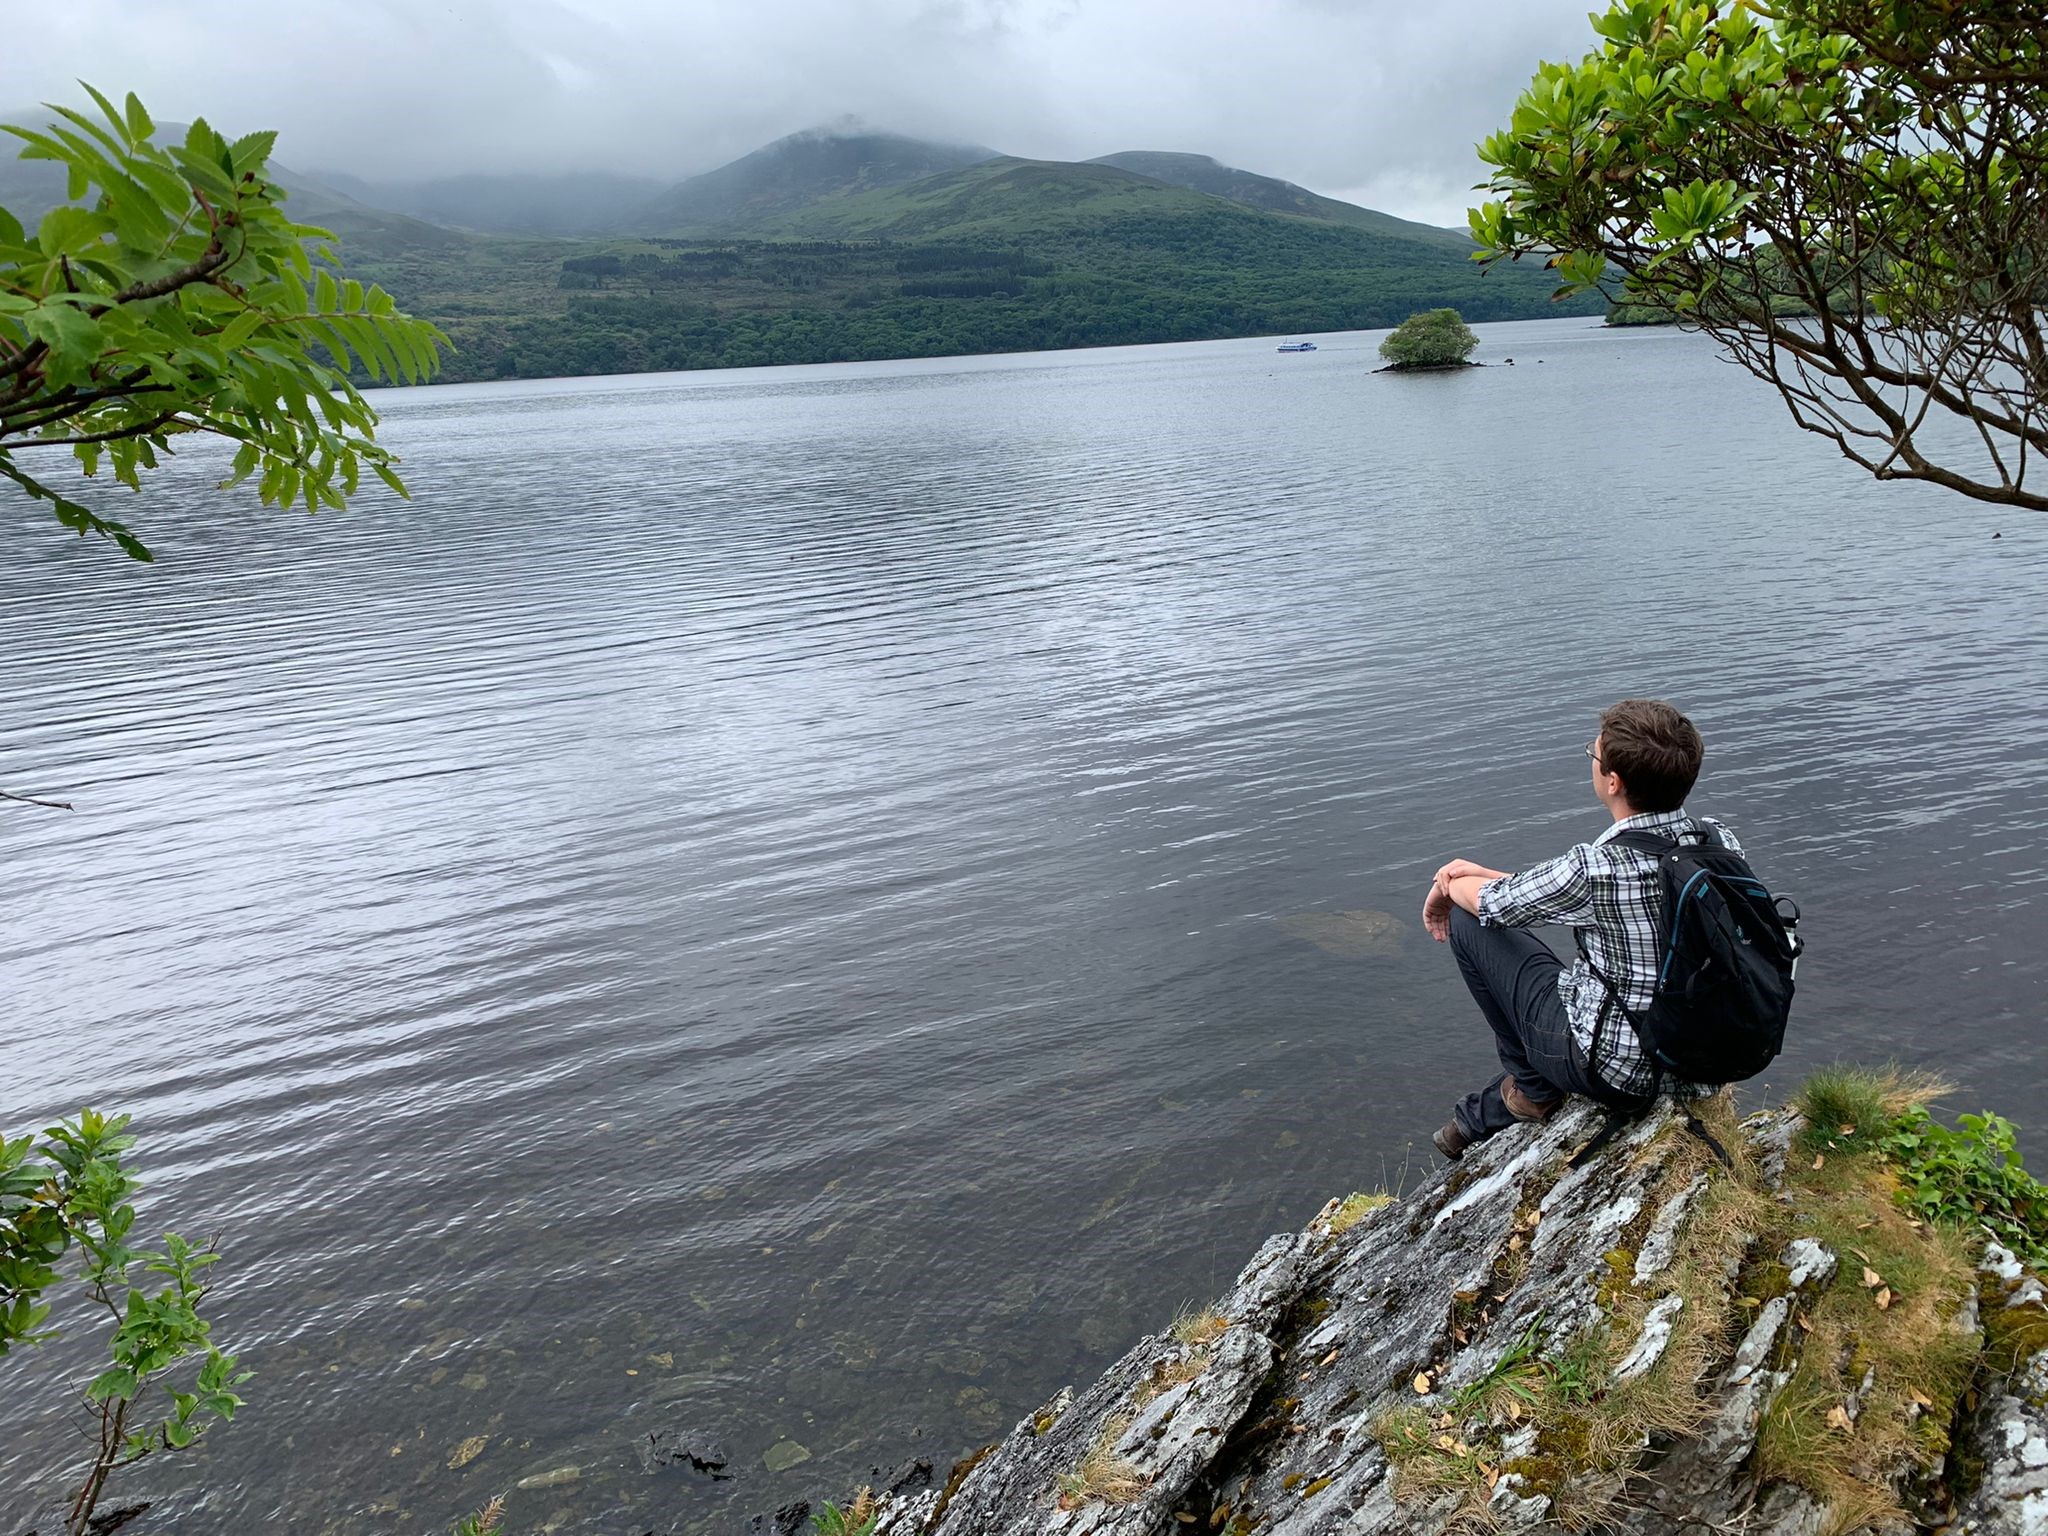 Eliot sitting on a rock coast overlooking a large body of water